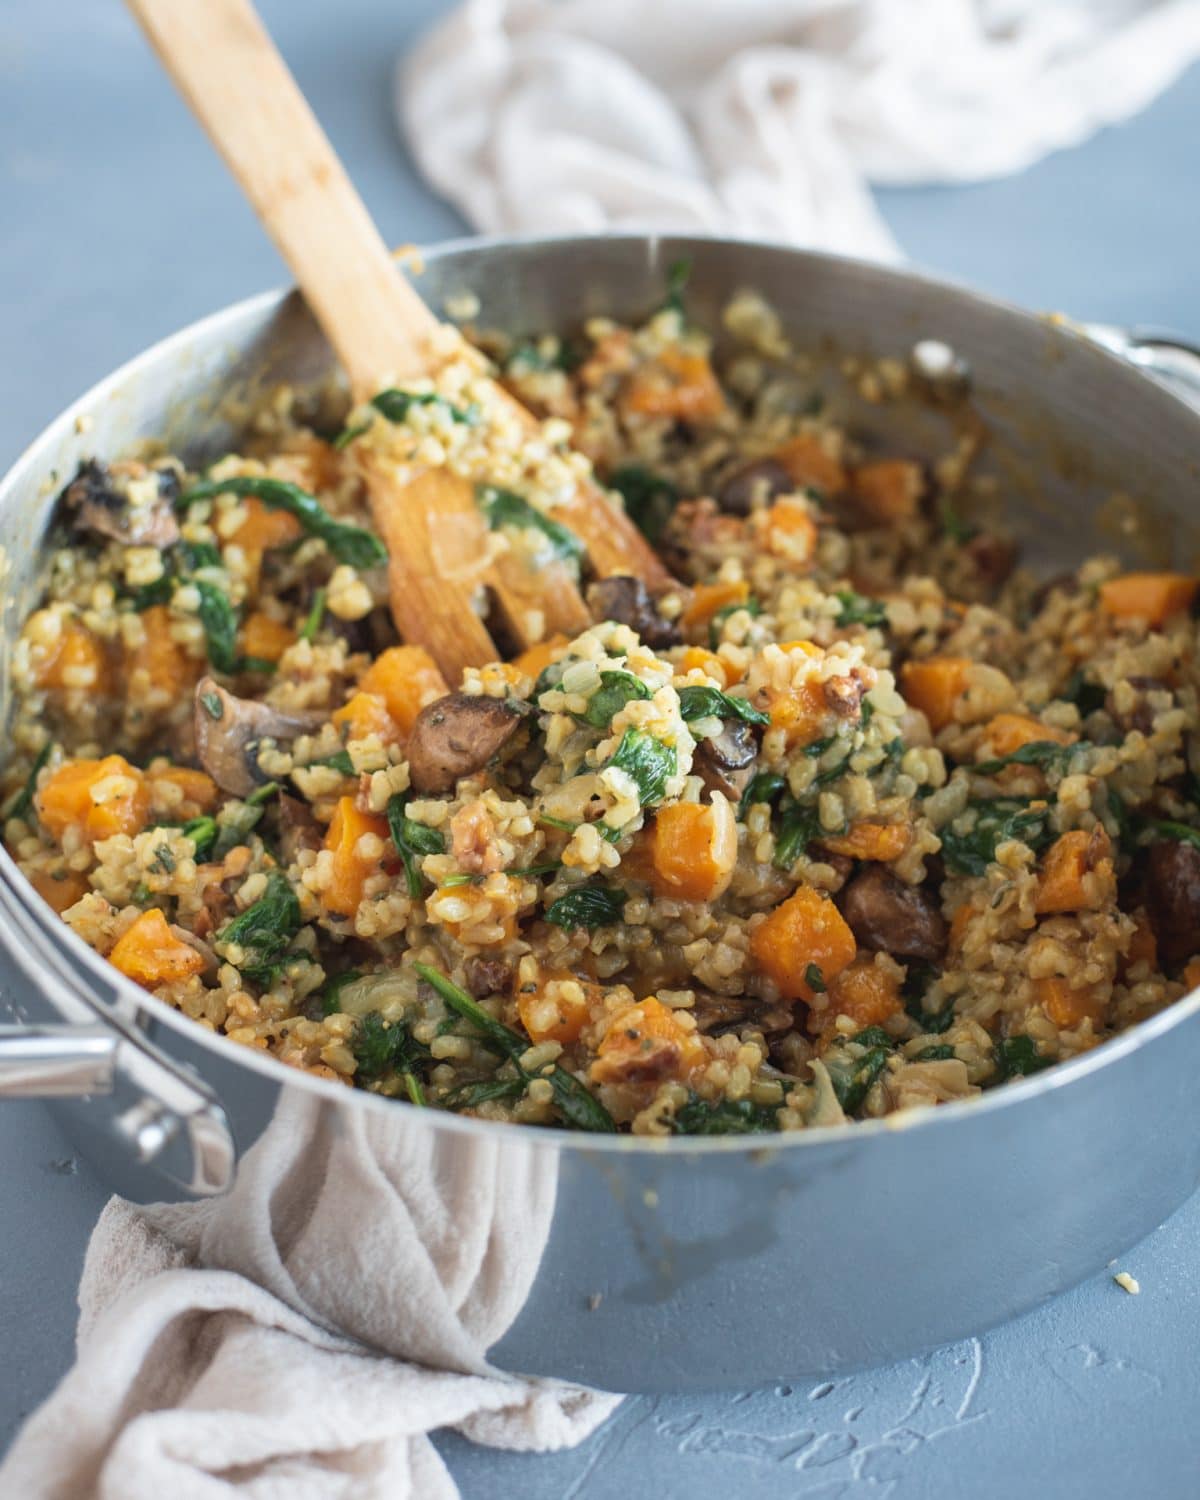 Pan with Brown Rice Risotto with Butternut Squash & Mushrooms 